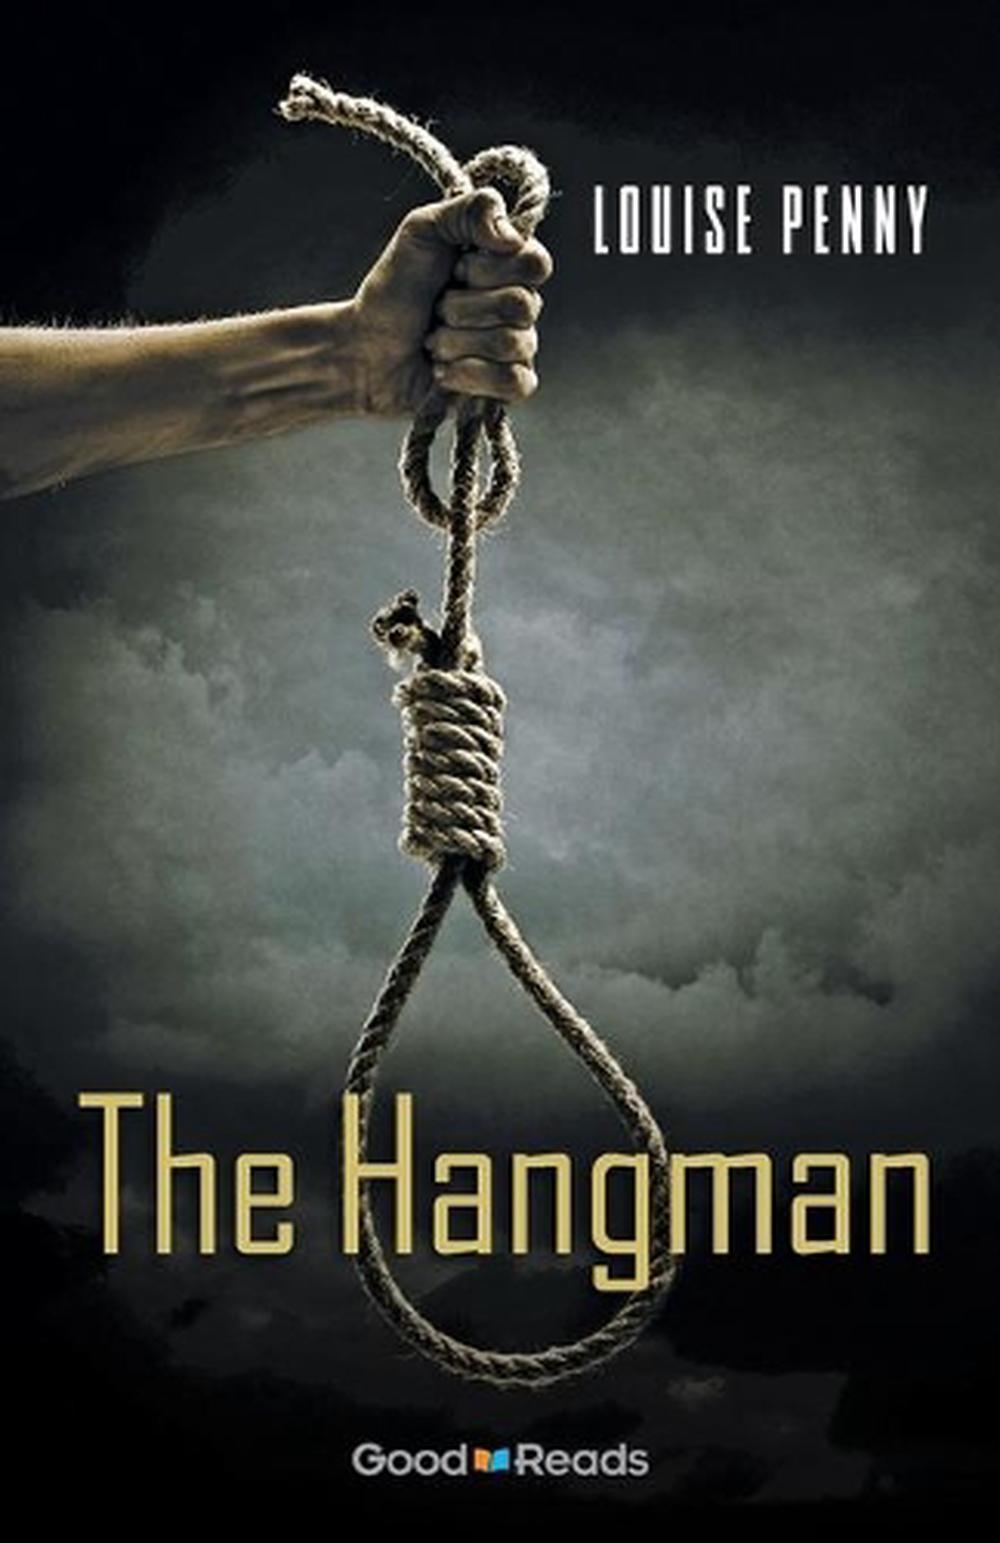 The Hangman by Louise Penny (English) Paperback Book Free Shipping! eBay